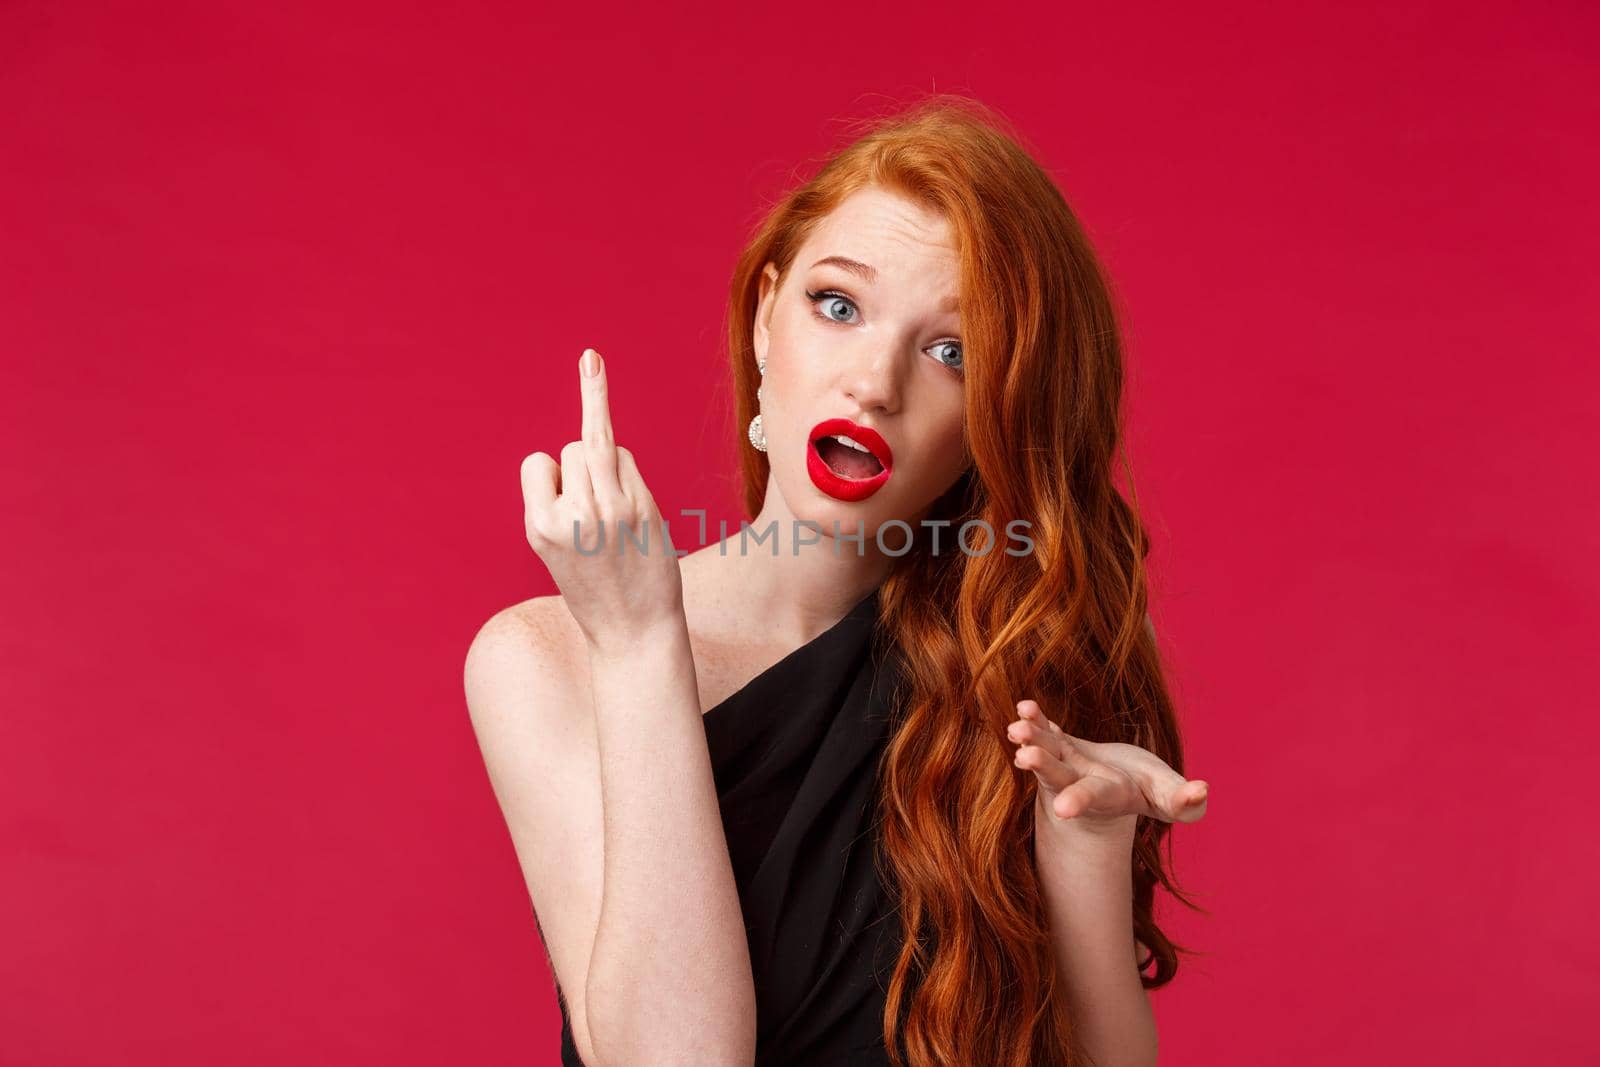 Careless and confident sassy, rebellious redhead woman in black dress, red lipstick, showing middle finger to person bothering her, tell to fuck off and mind your own business, red background.